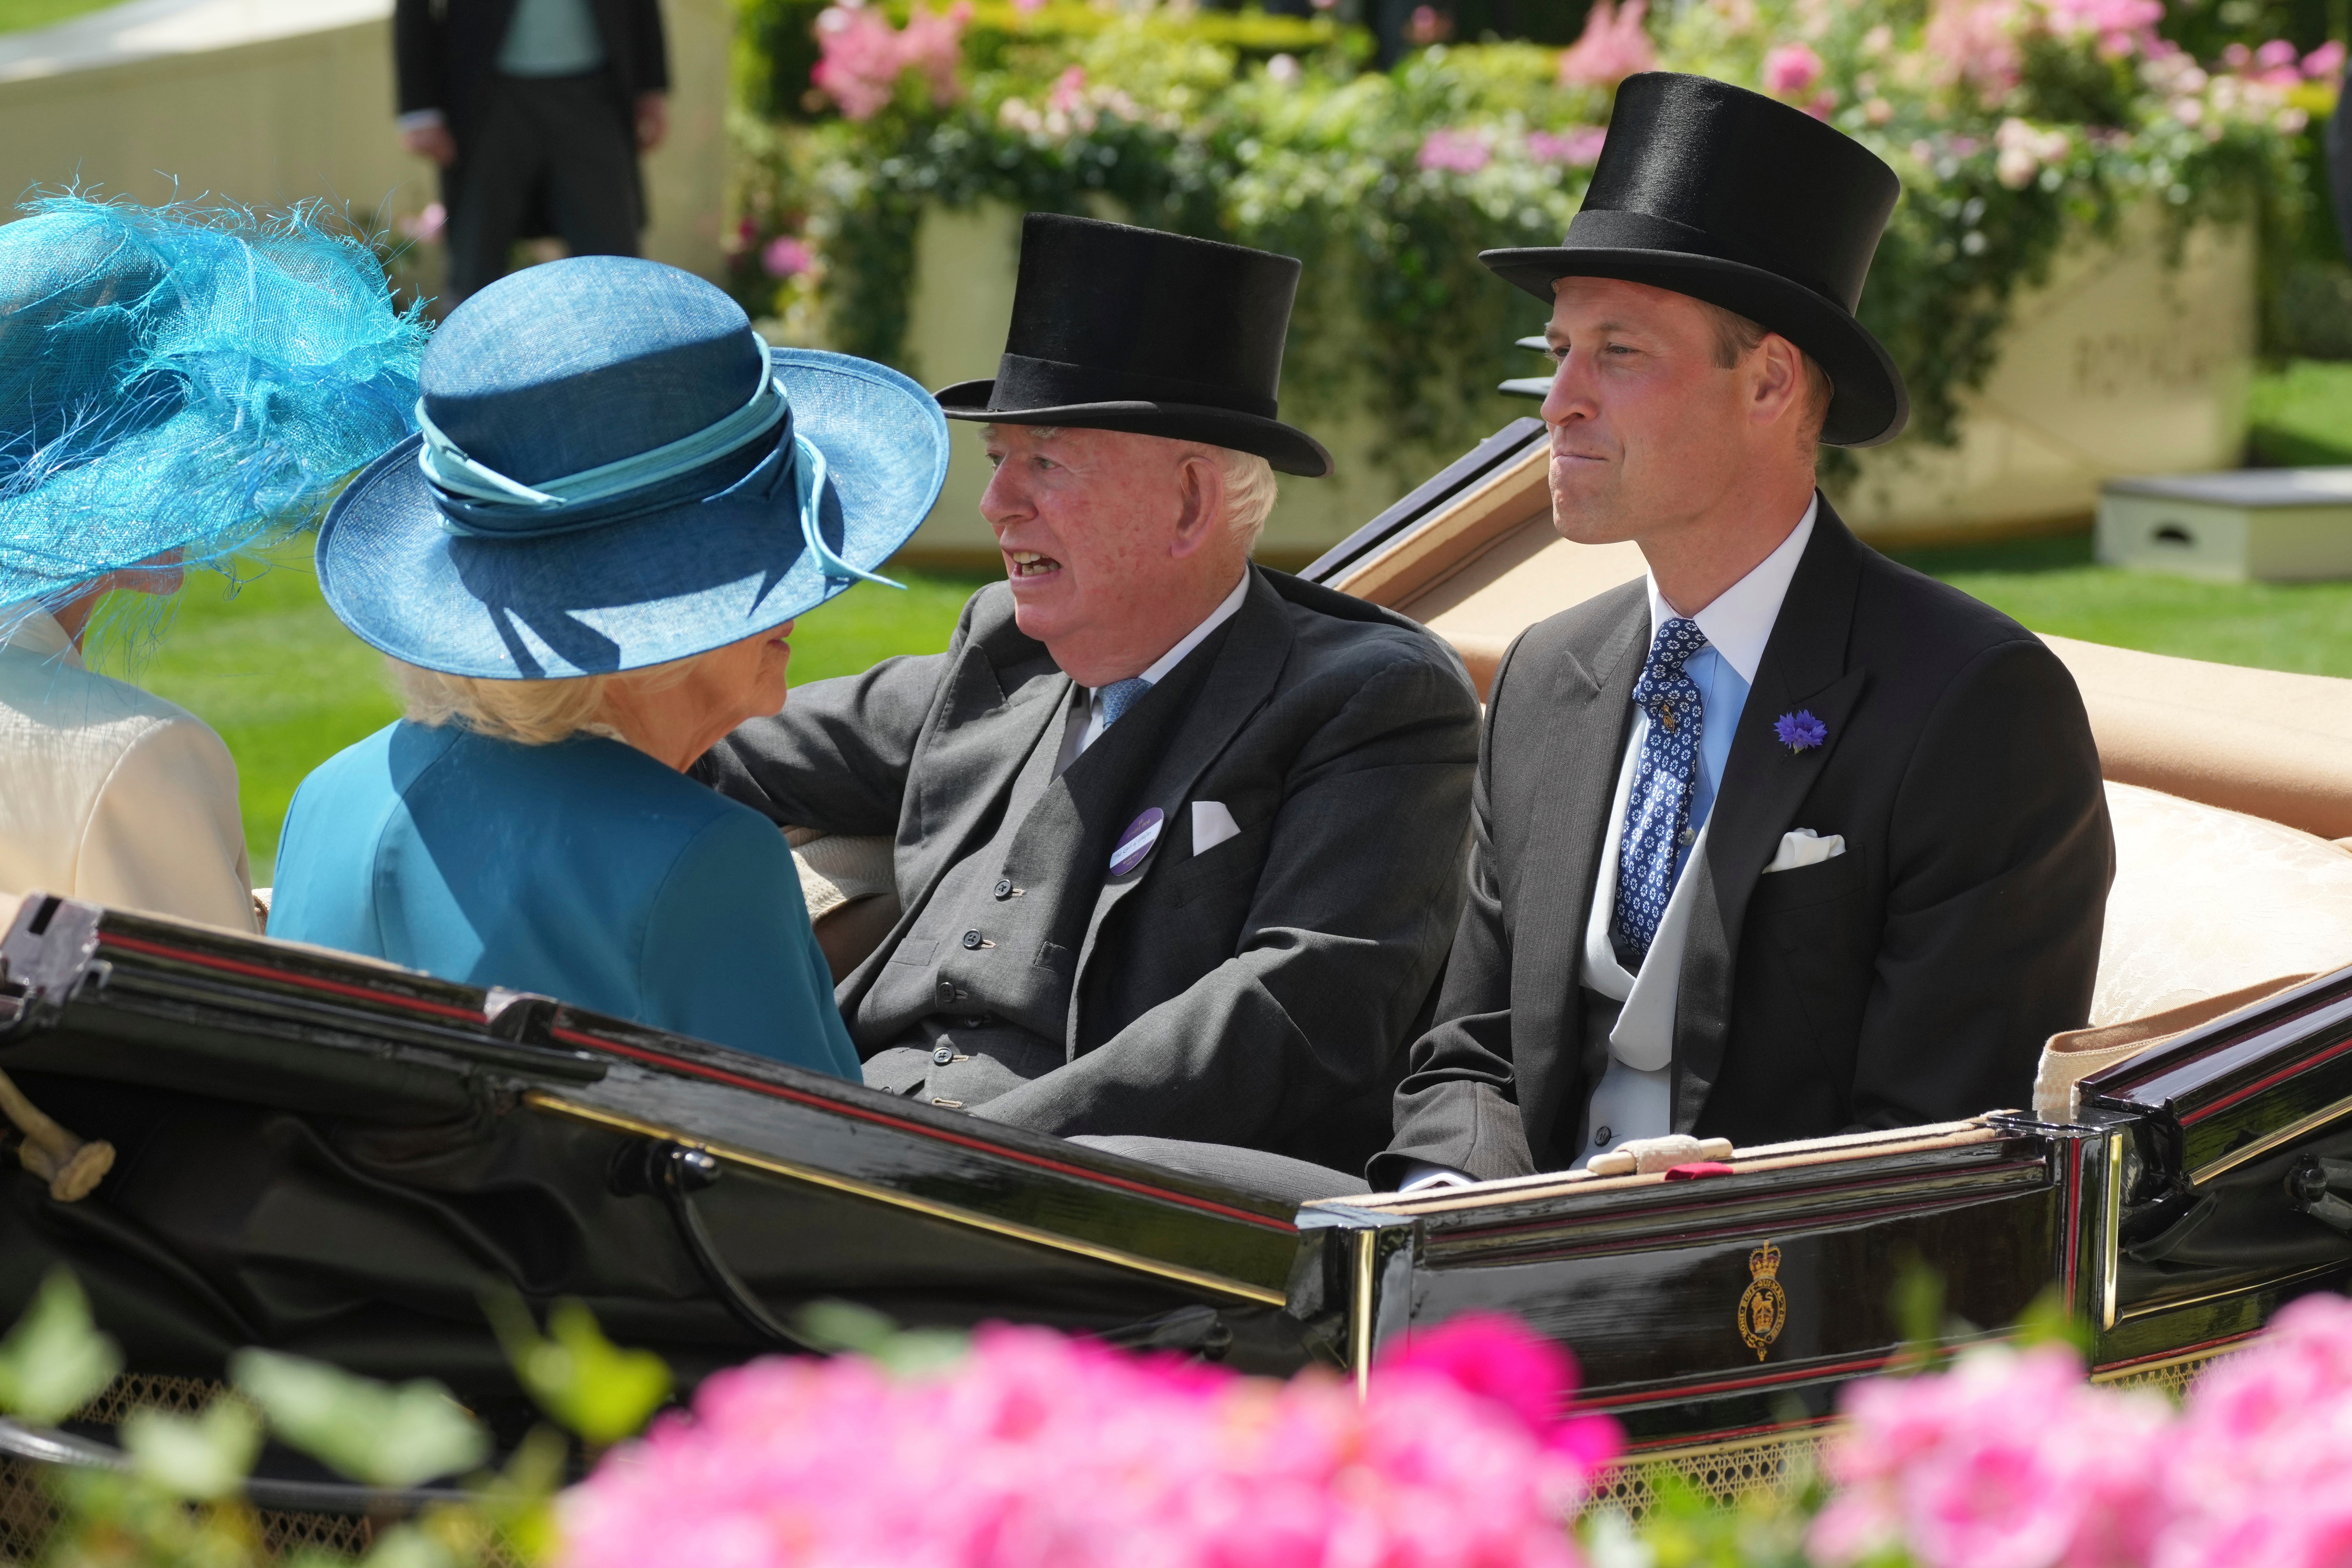 The pair attended Royal Ascot without their respective spouses yesterday.